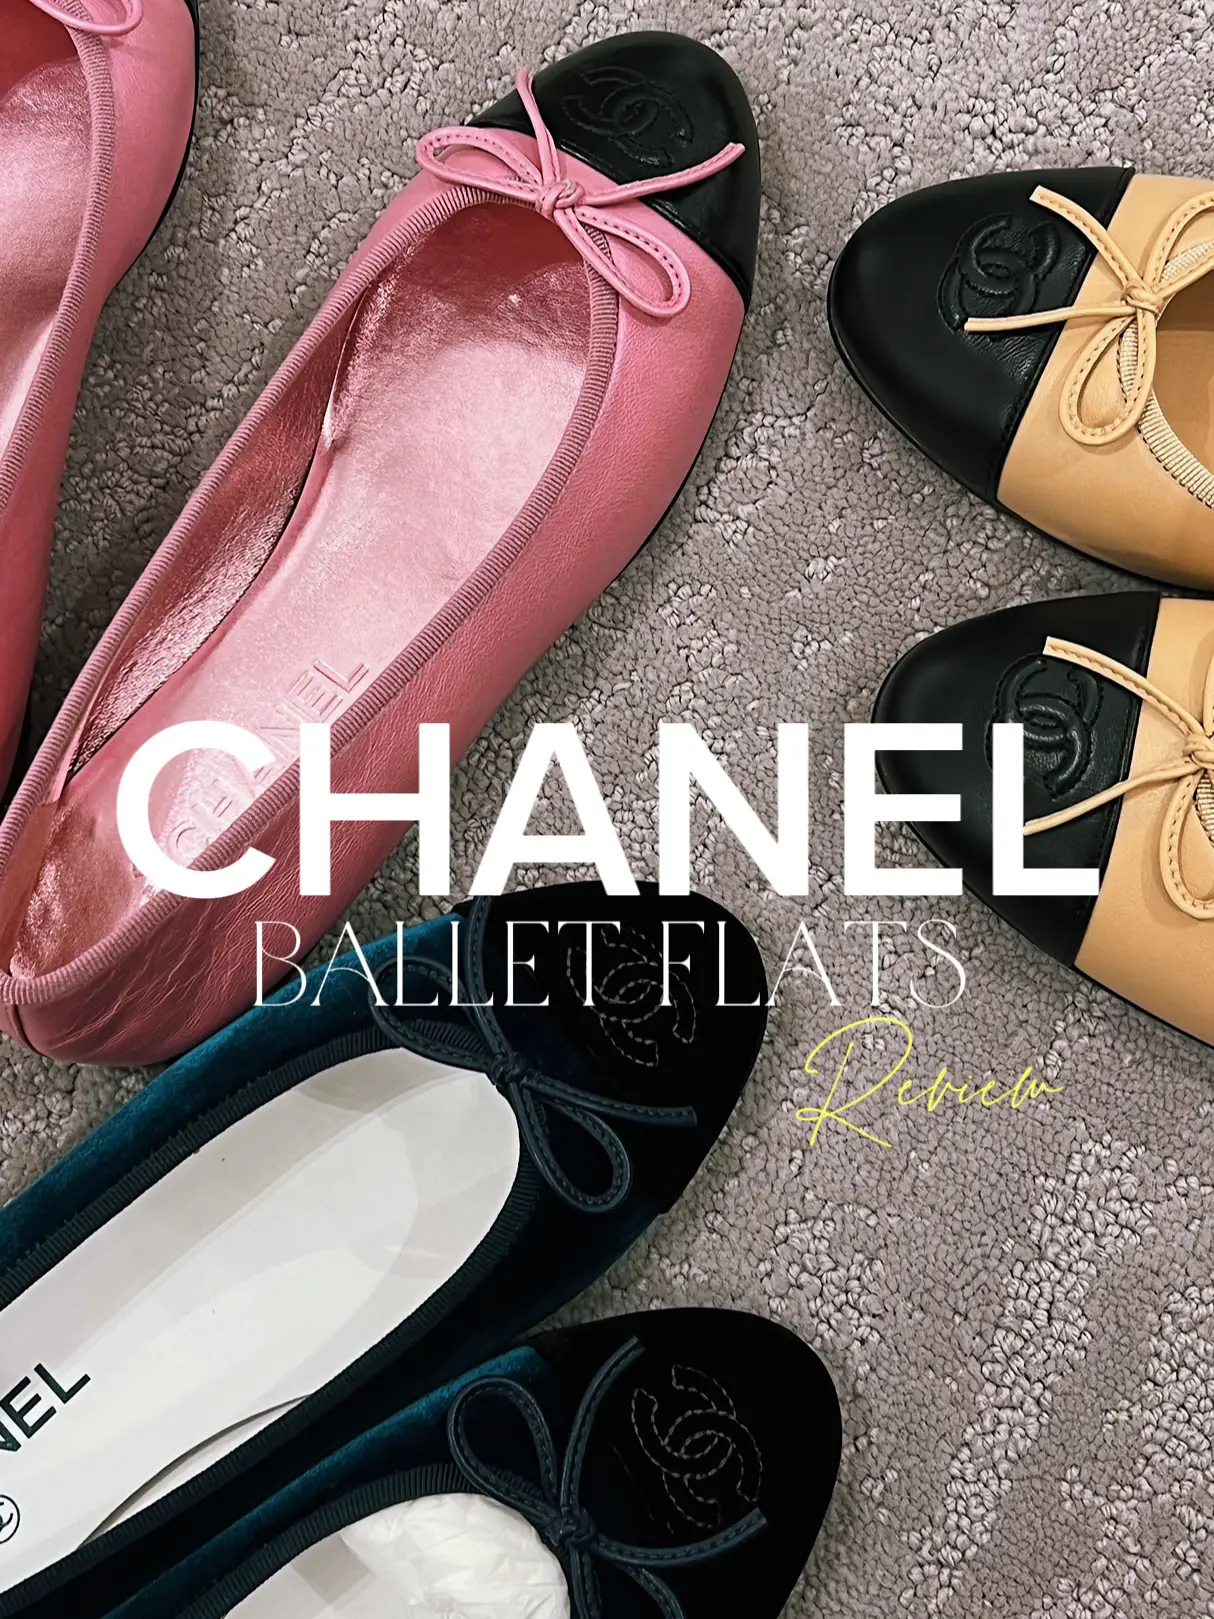 Chanel Ballet Flats Review, Gallery posted by Lalavied